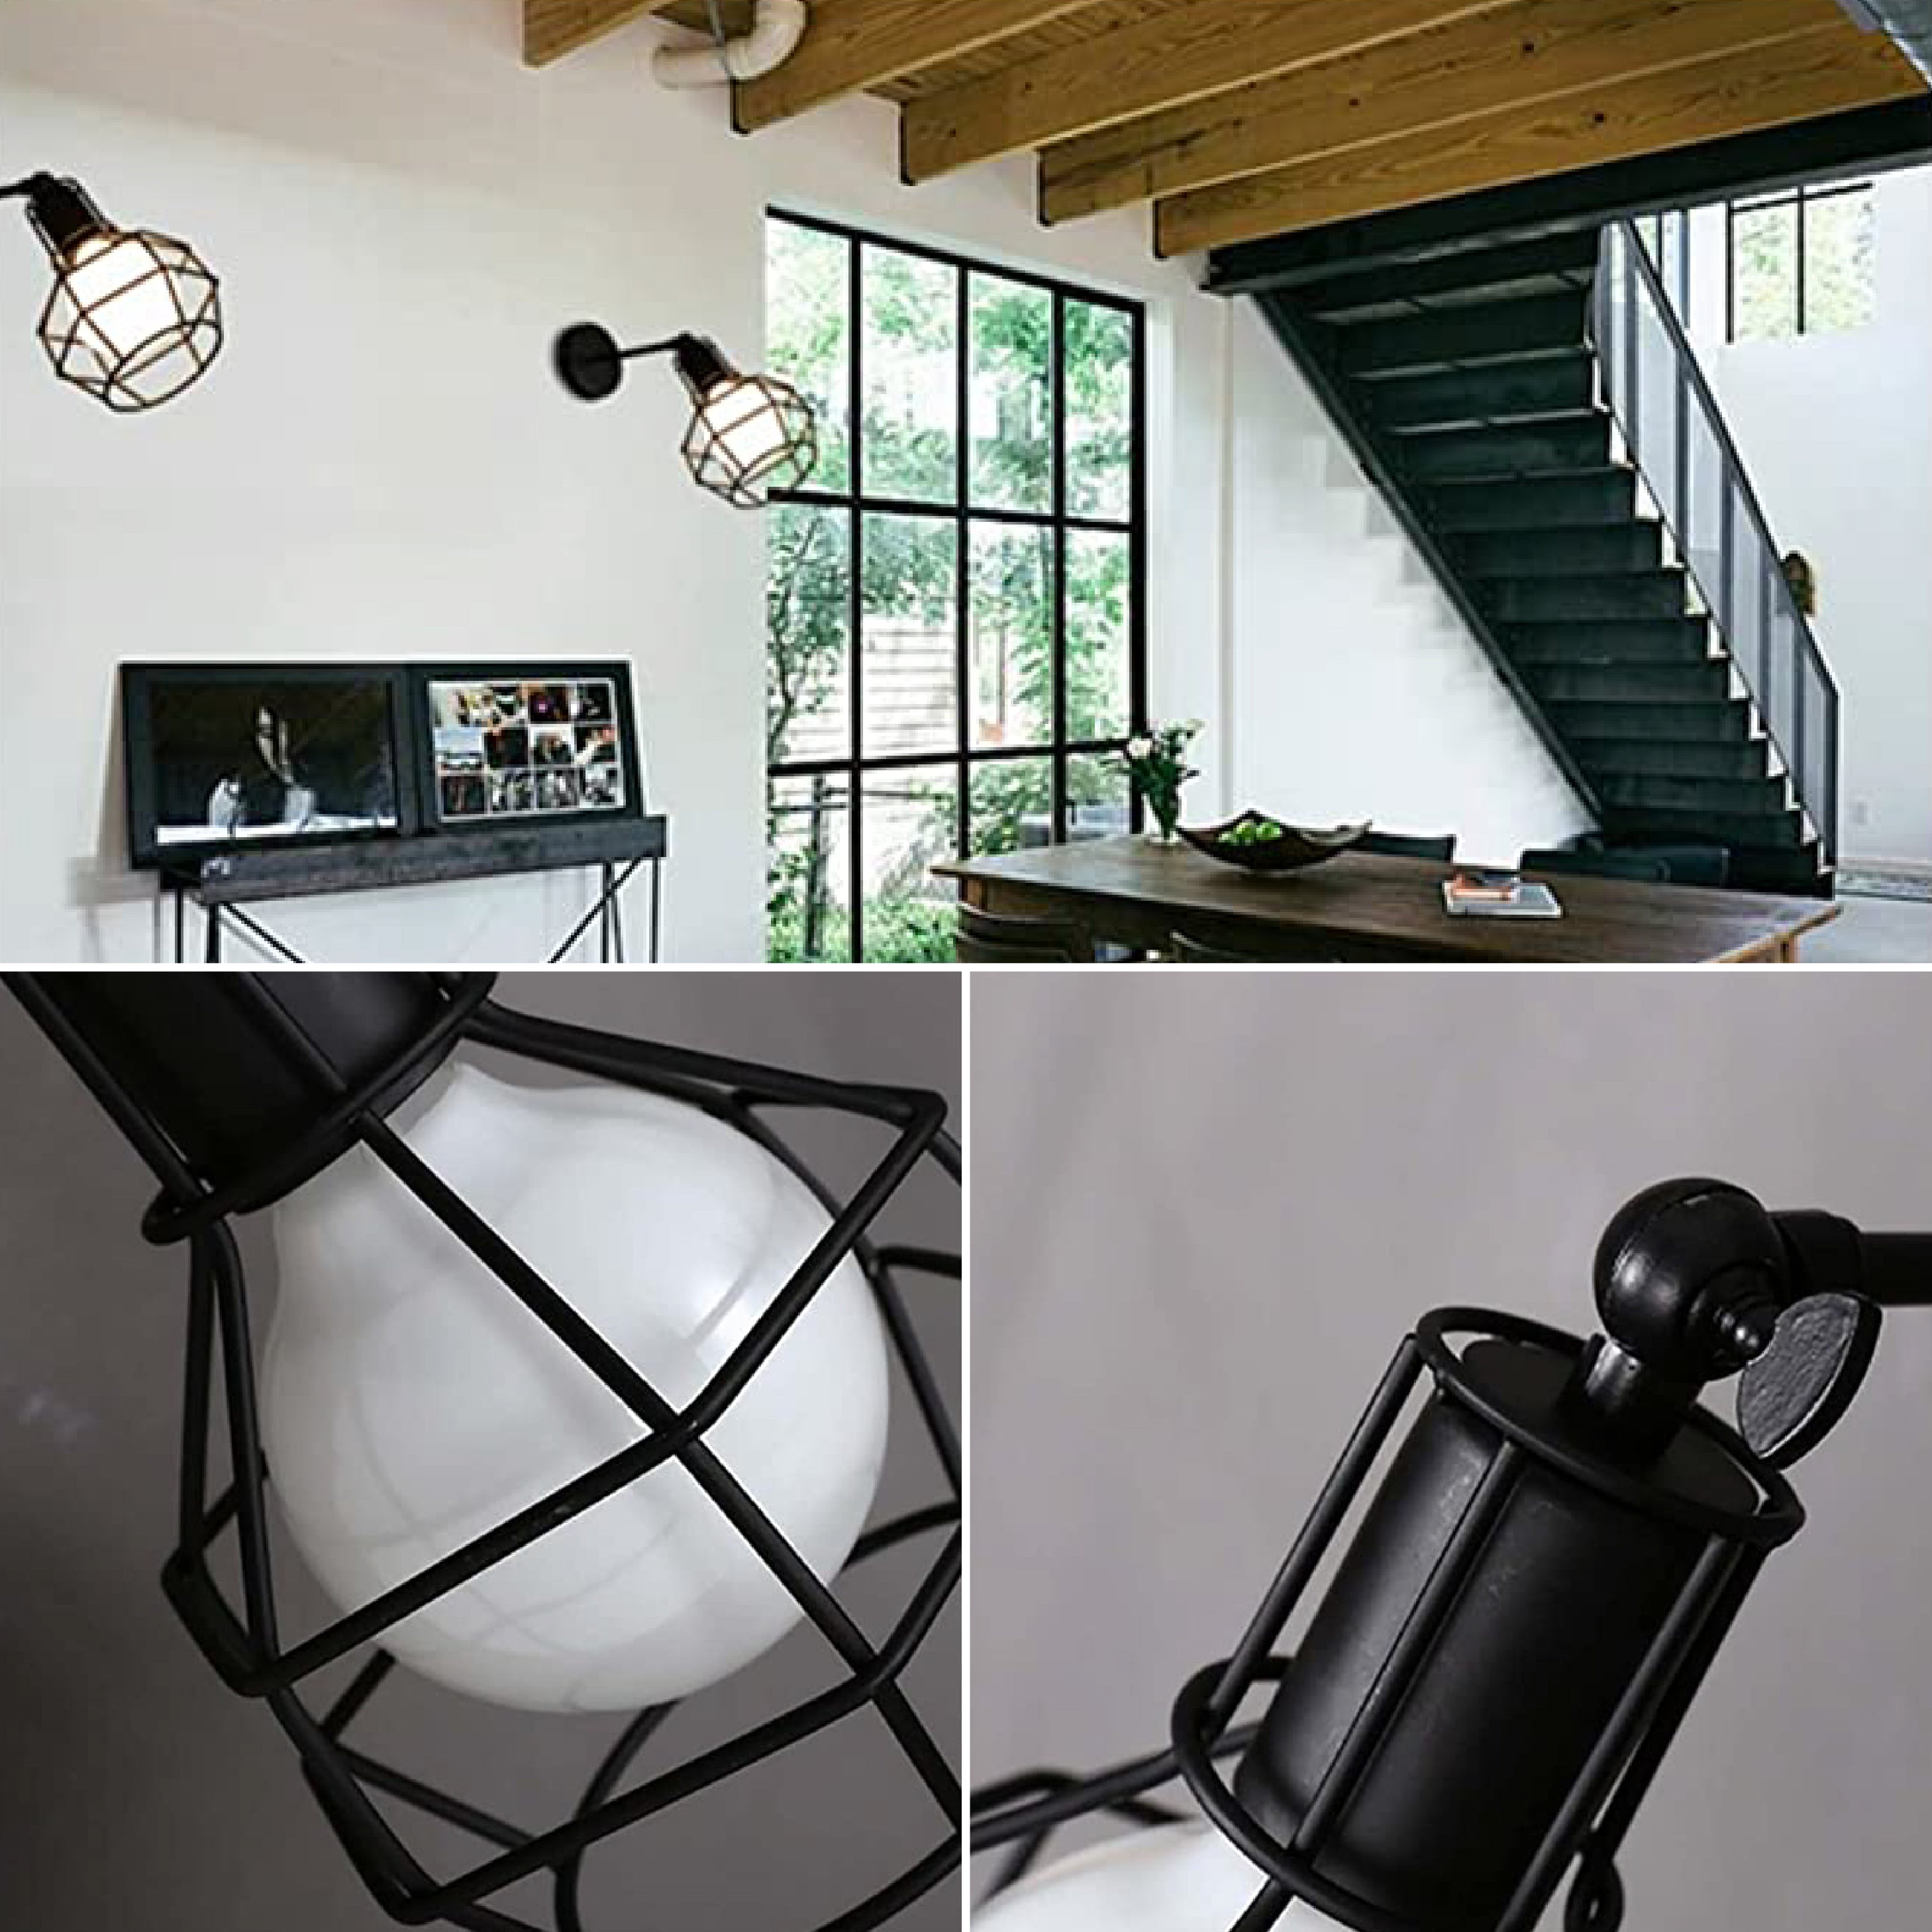 1 pack industrial wall sconce Black farmhouse wall sconce cutter wall sconce lighting